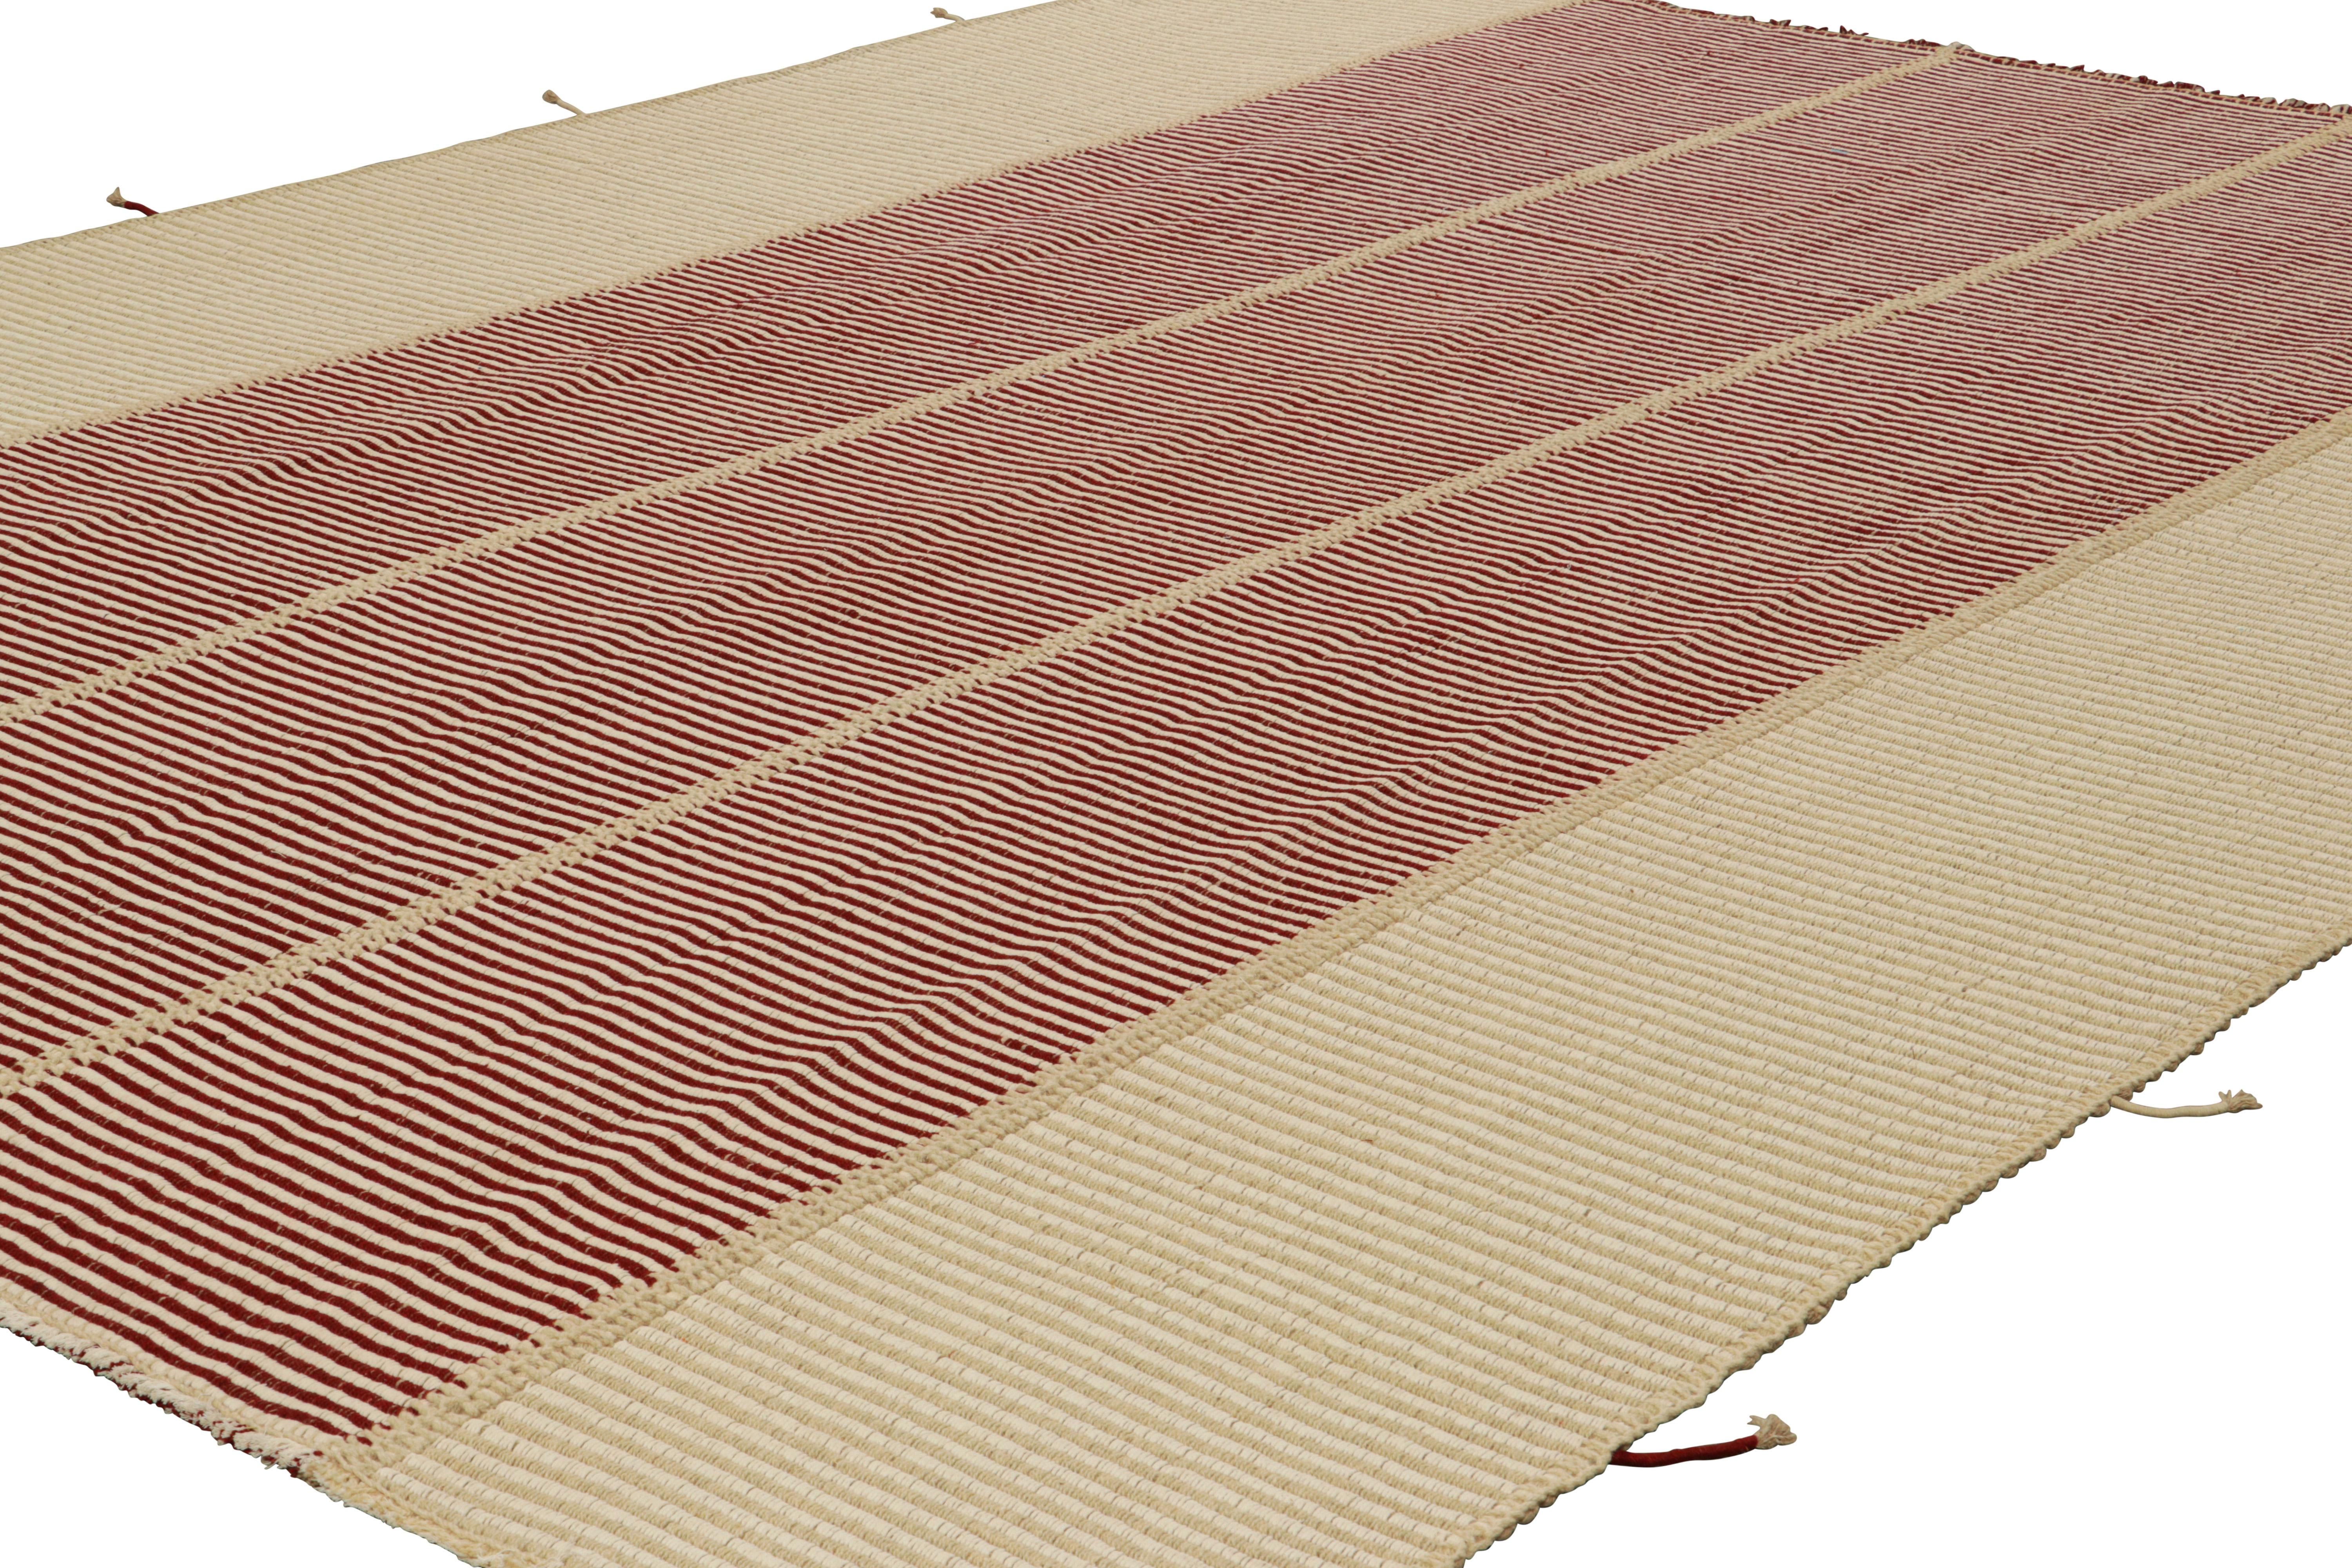 Afghan Rug & Kilim’s Contemporary Kilim in Red and Beige Textural Stripes For Sale